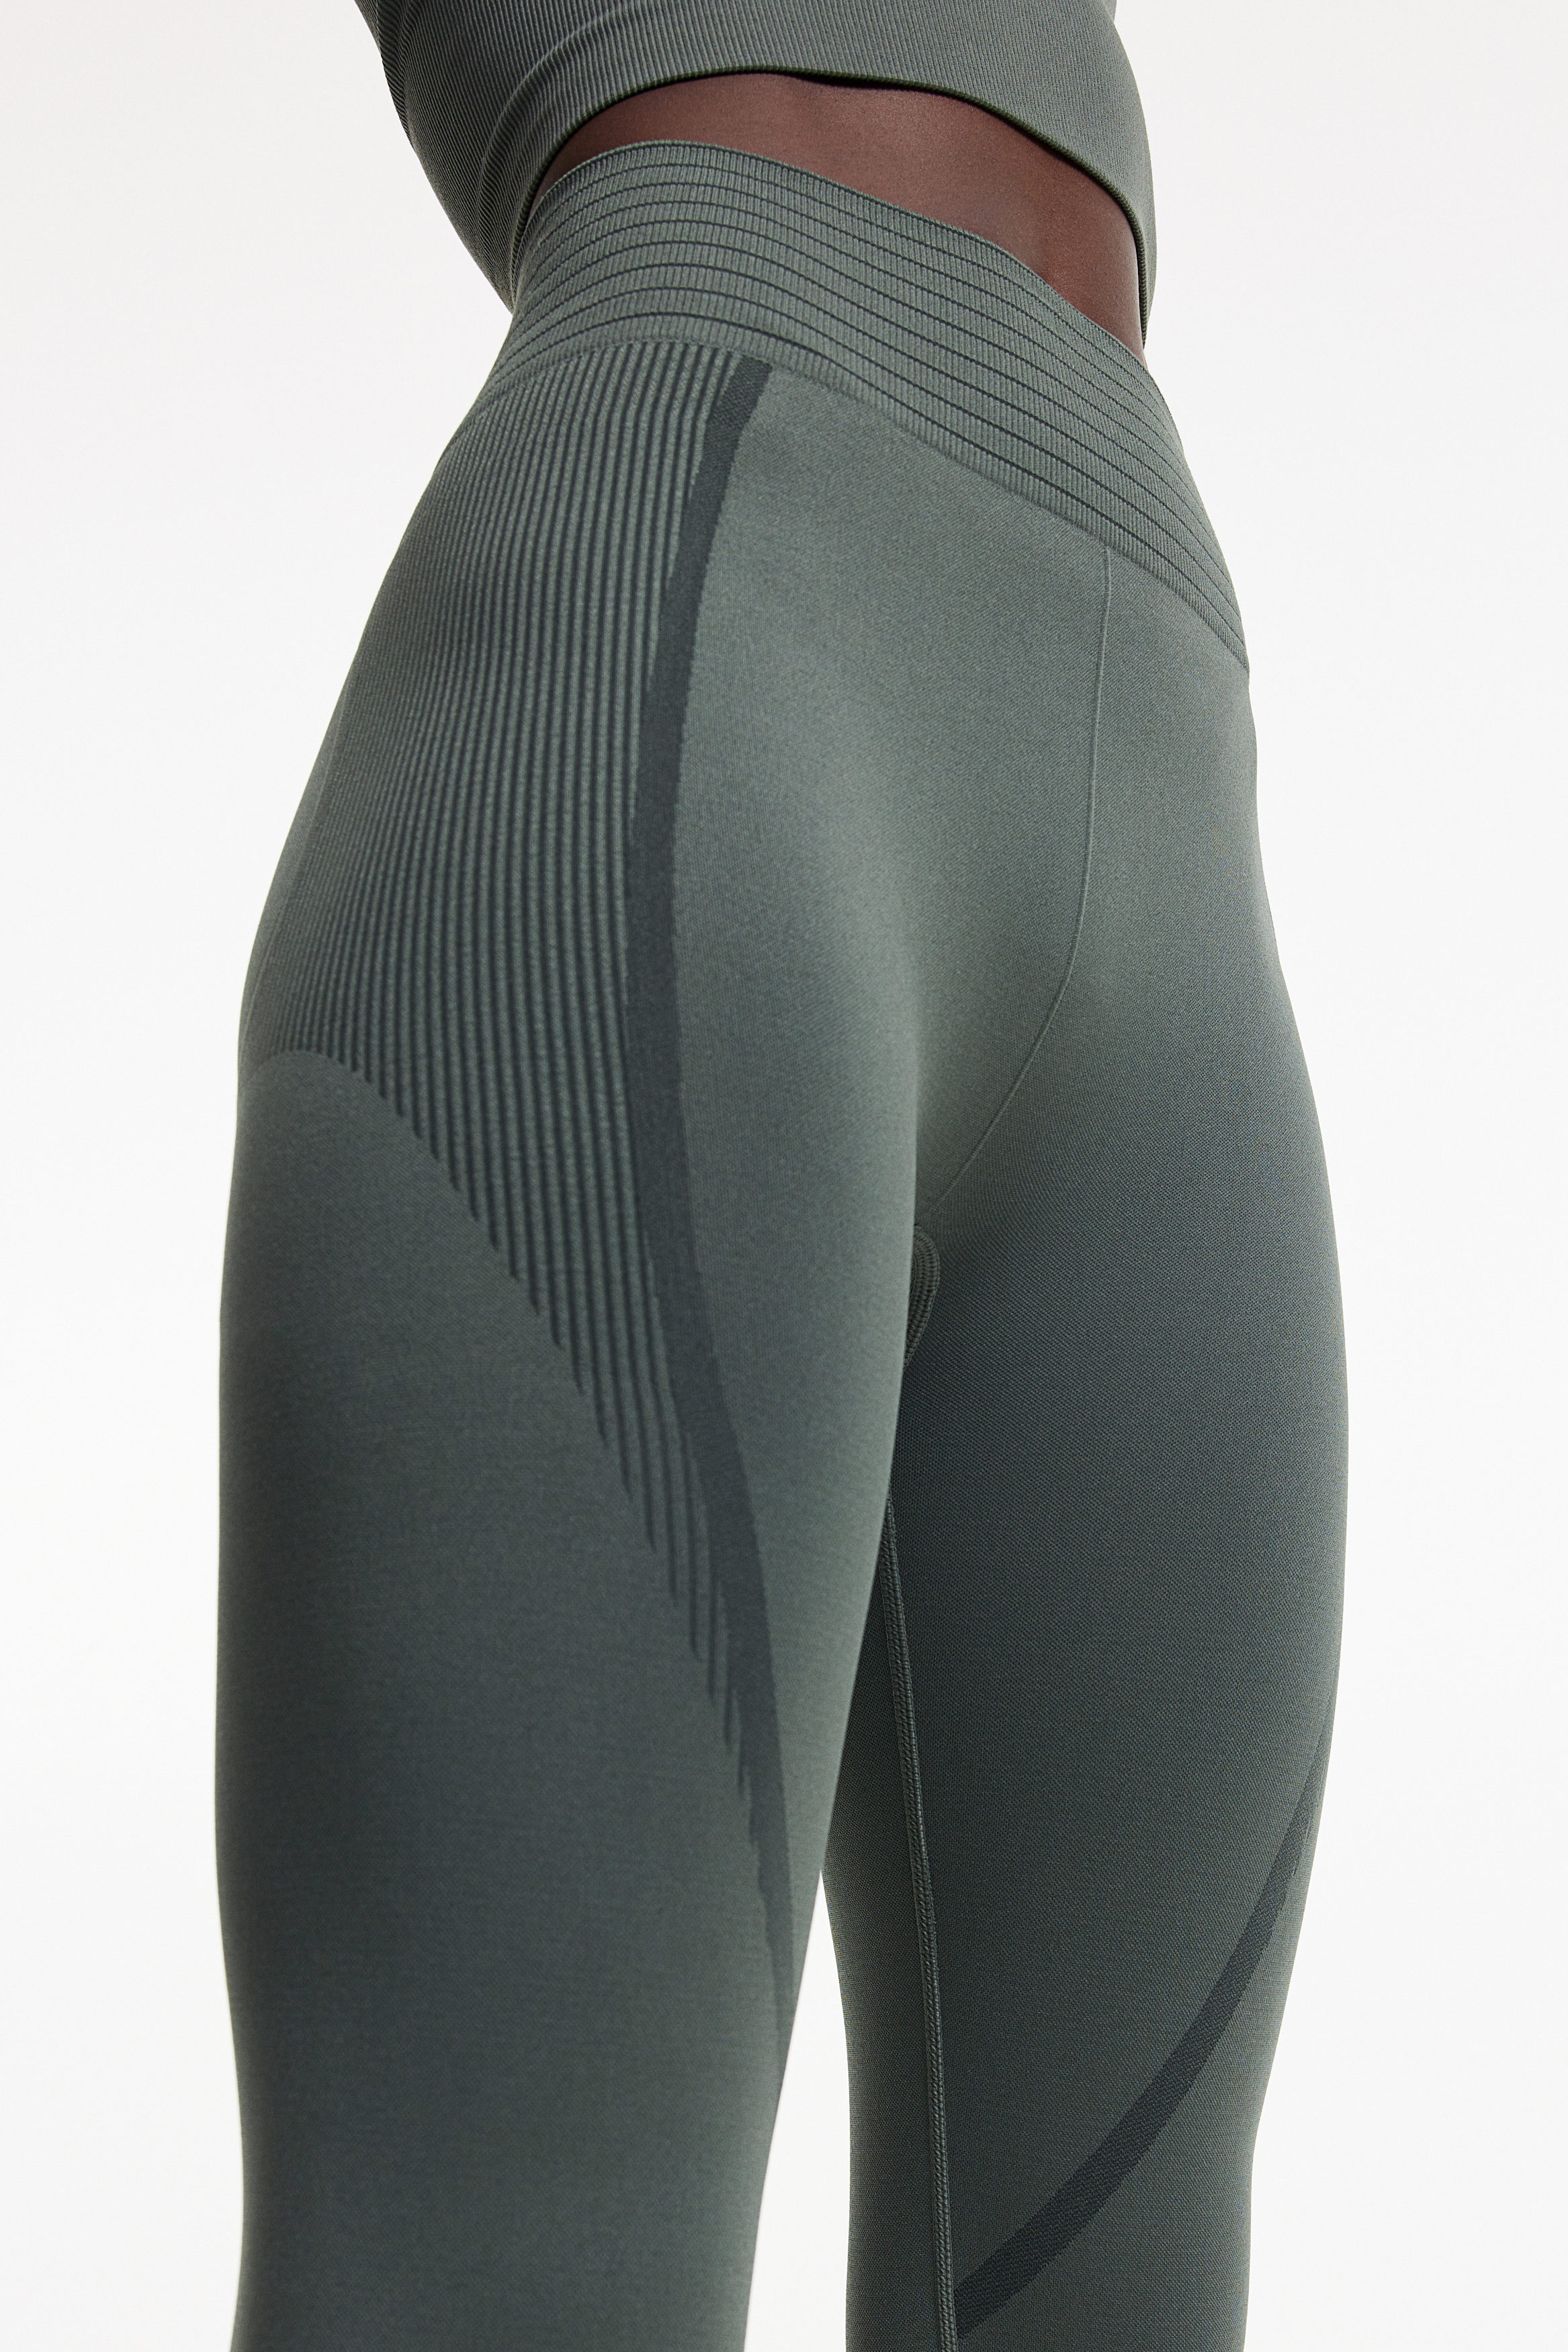 H&m Seamless Sports Leggings Women's  International Society of Precision  Agriculture